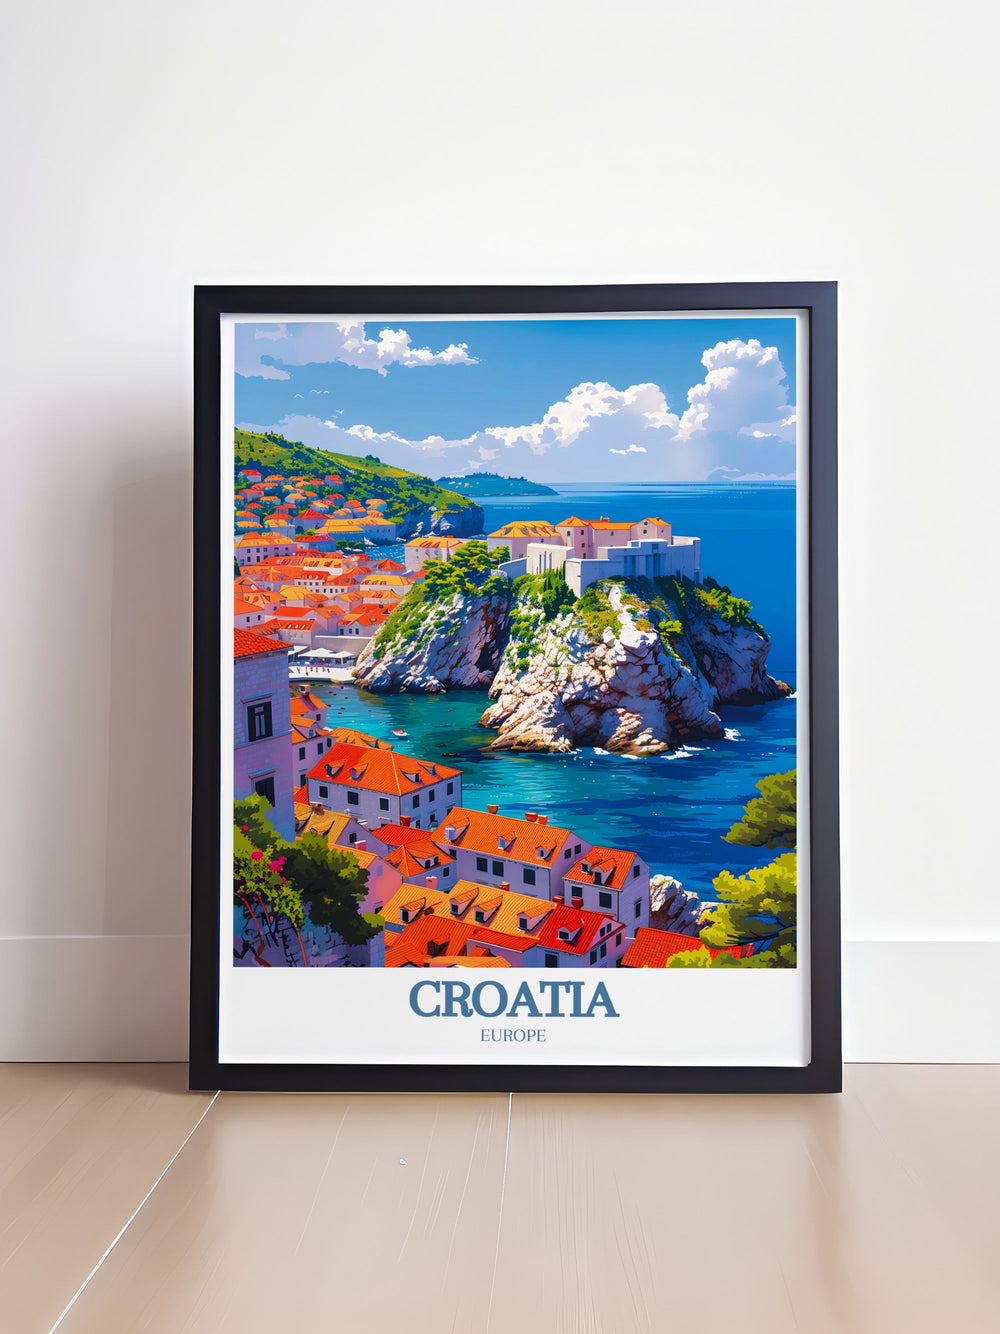 Featuring breathtaking views of Dubrovnik Old Town and the Adriatic Sea, this poster is perfect for those who wish to bring a piece of Croatias historical and natural splendor into their home.